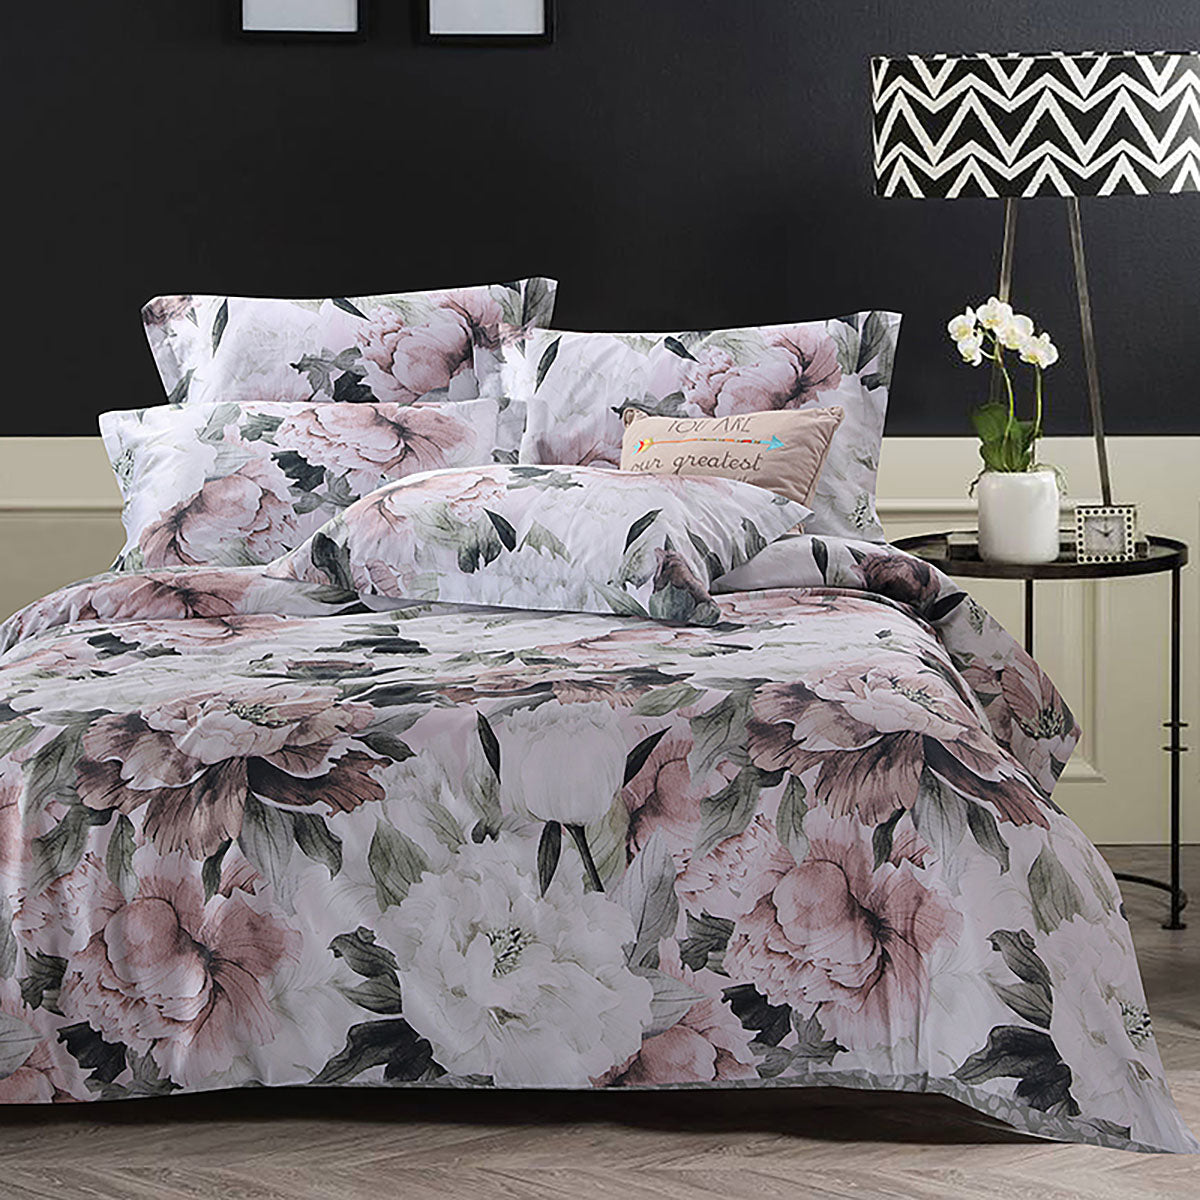 Znl Blossom Pattern Duvet Cover Canada King Size And Queen Size